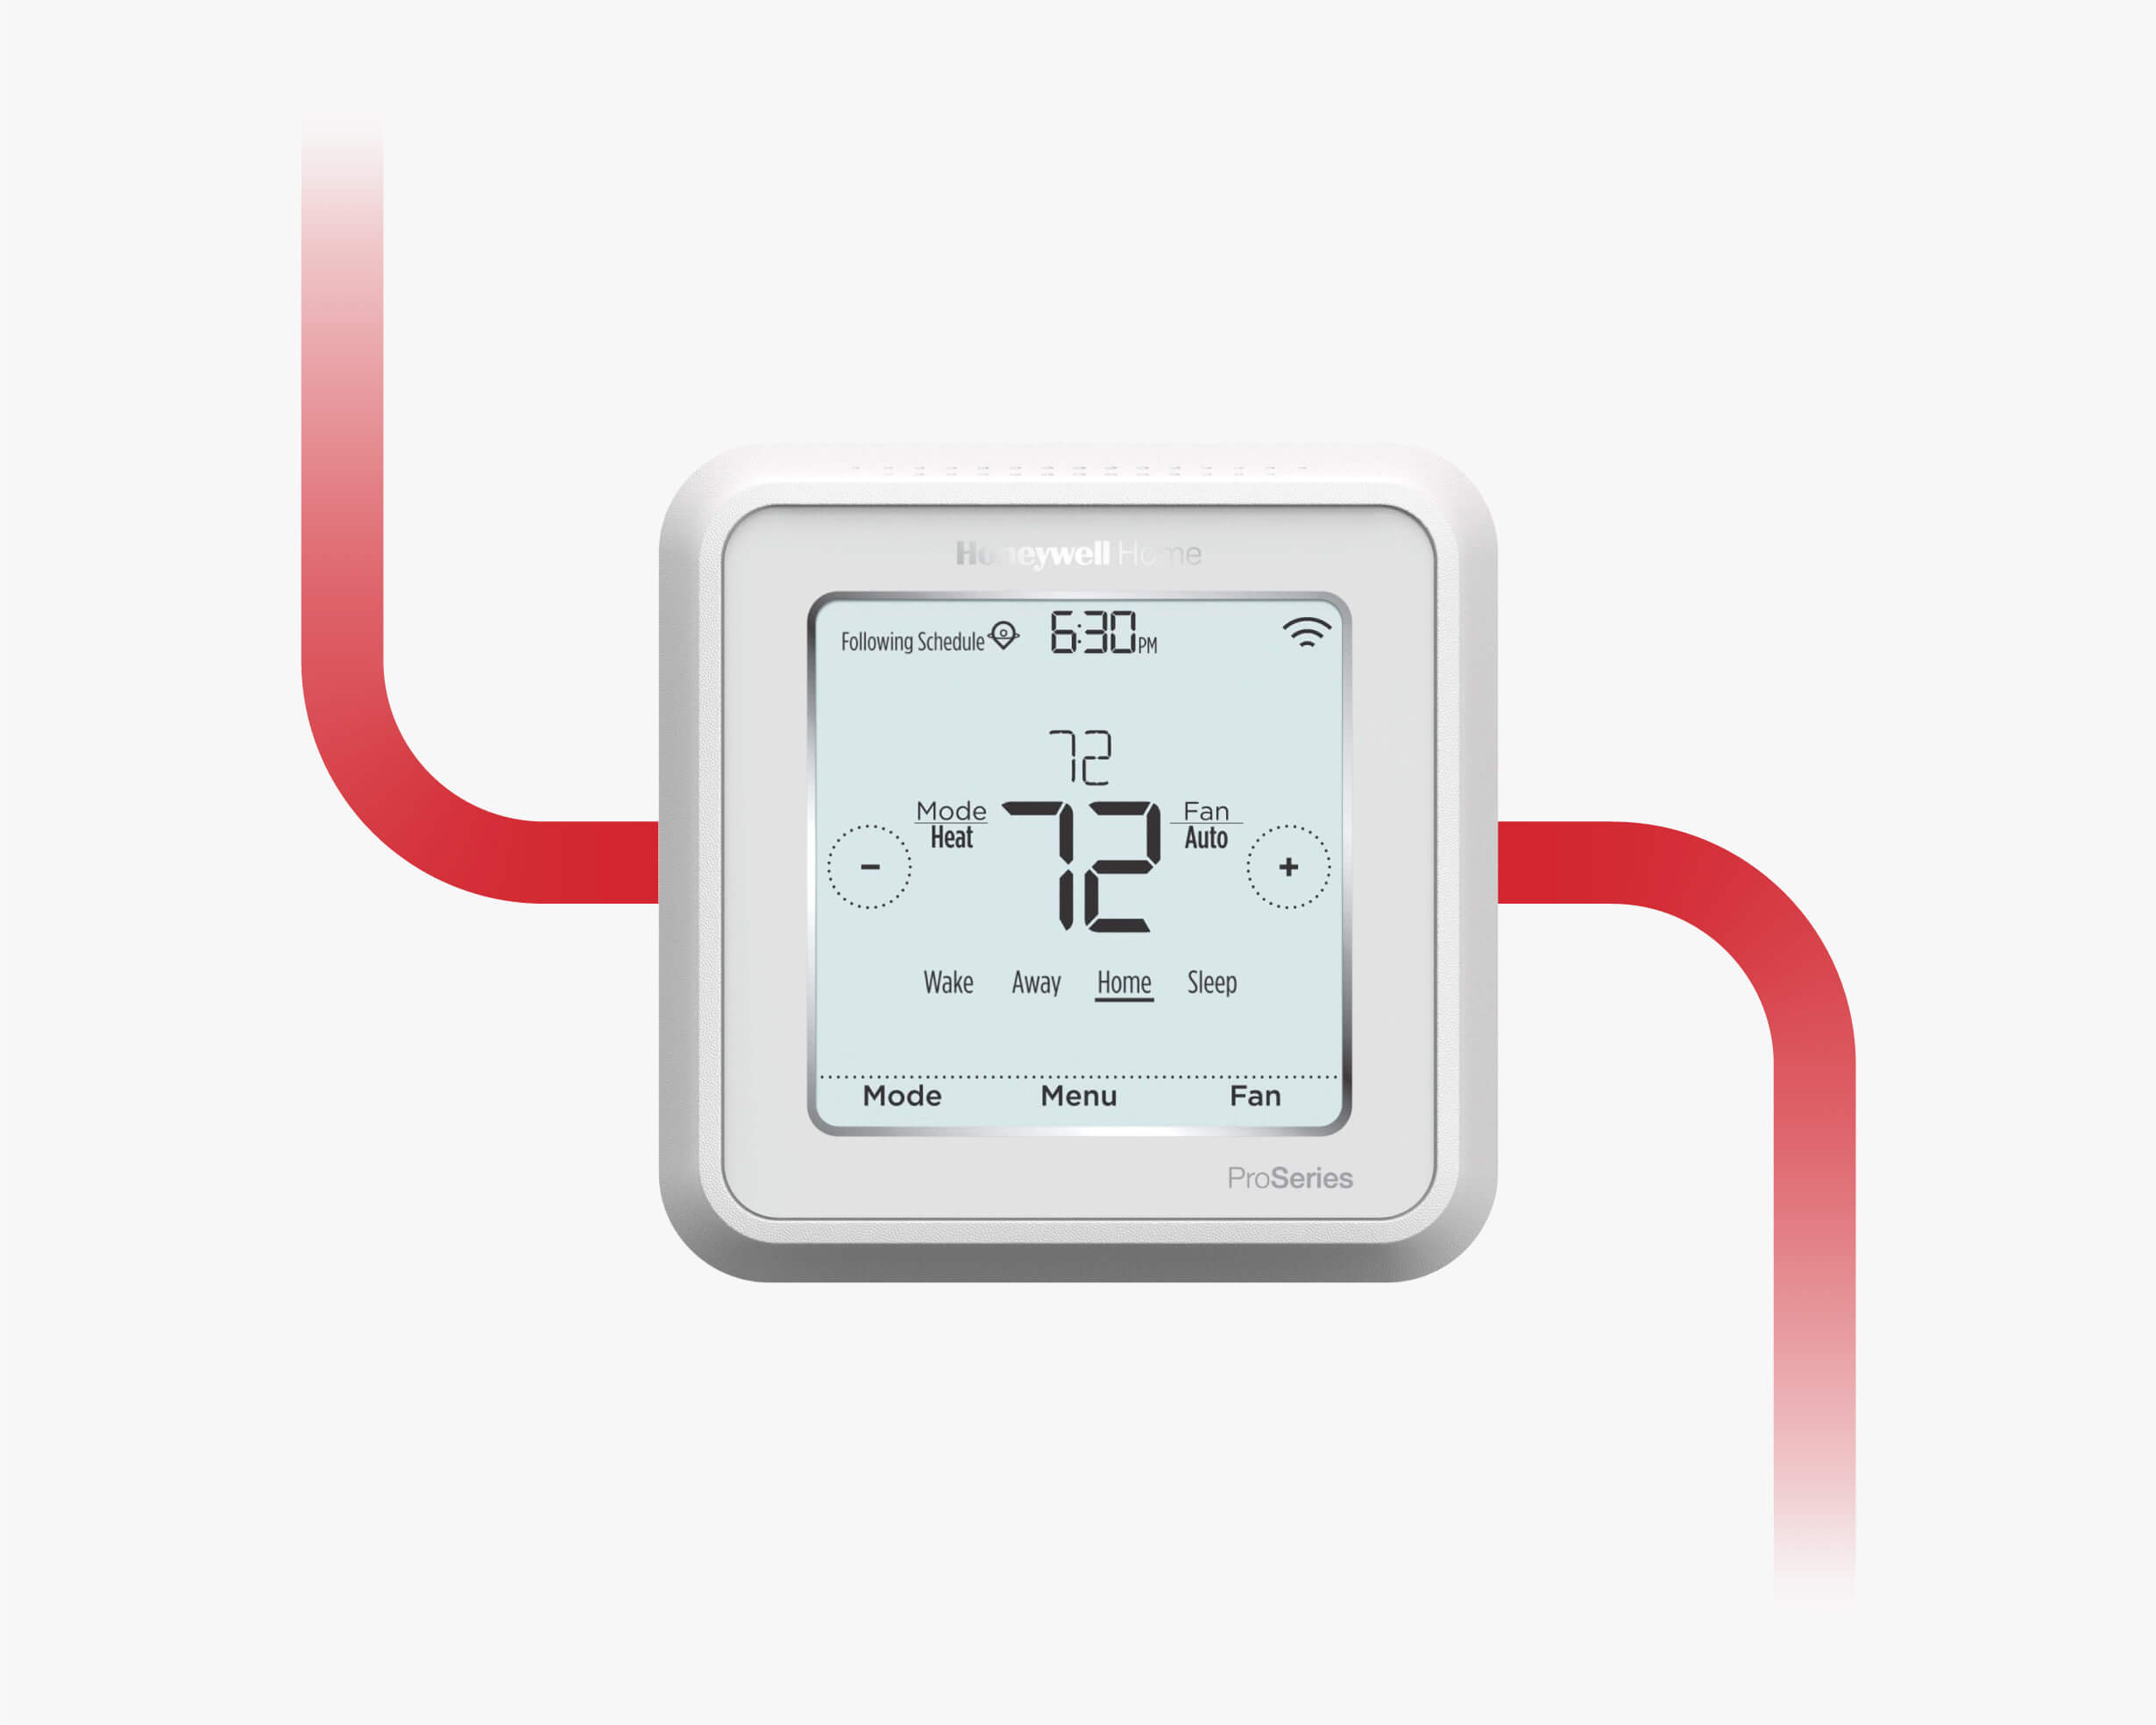 A T6 smart thermostat from Honeywell is a part of the smart home automation features of the ProSeries security system